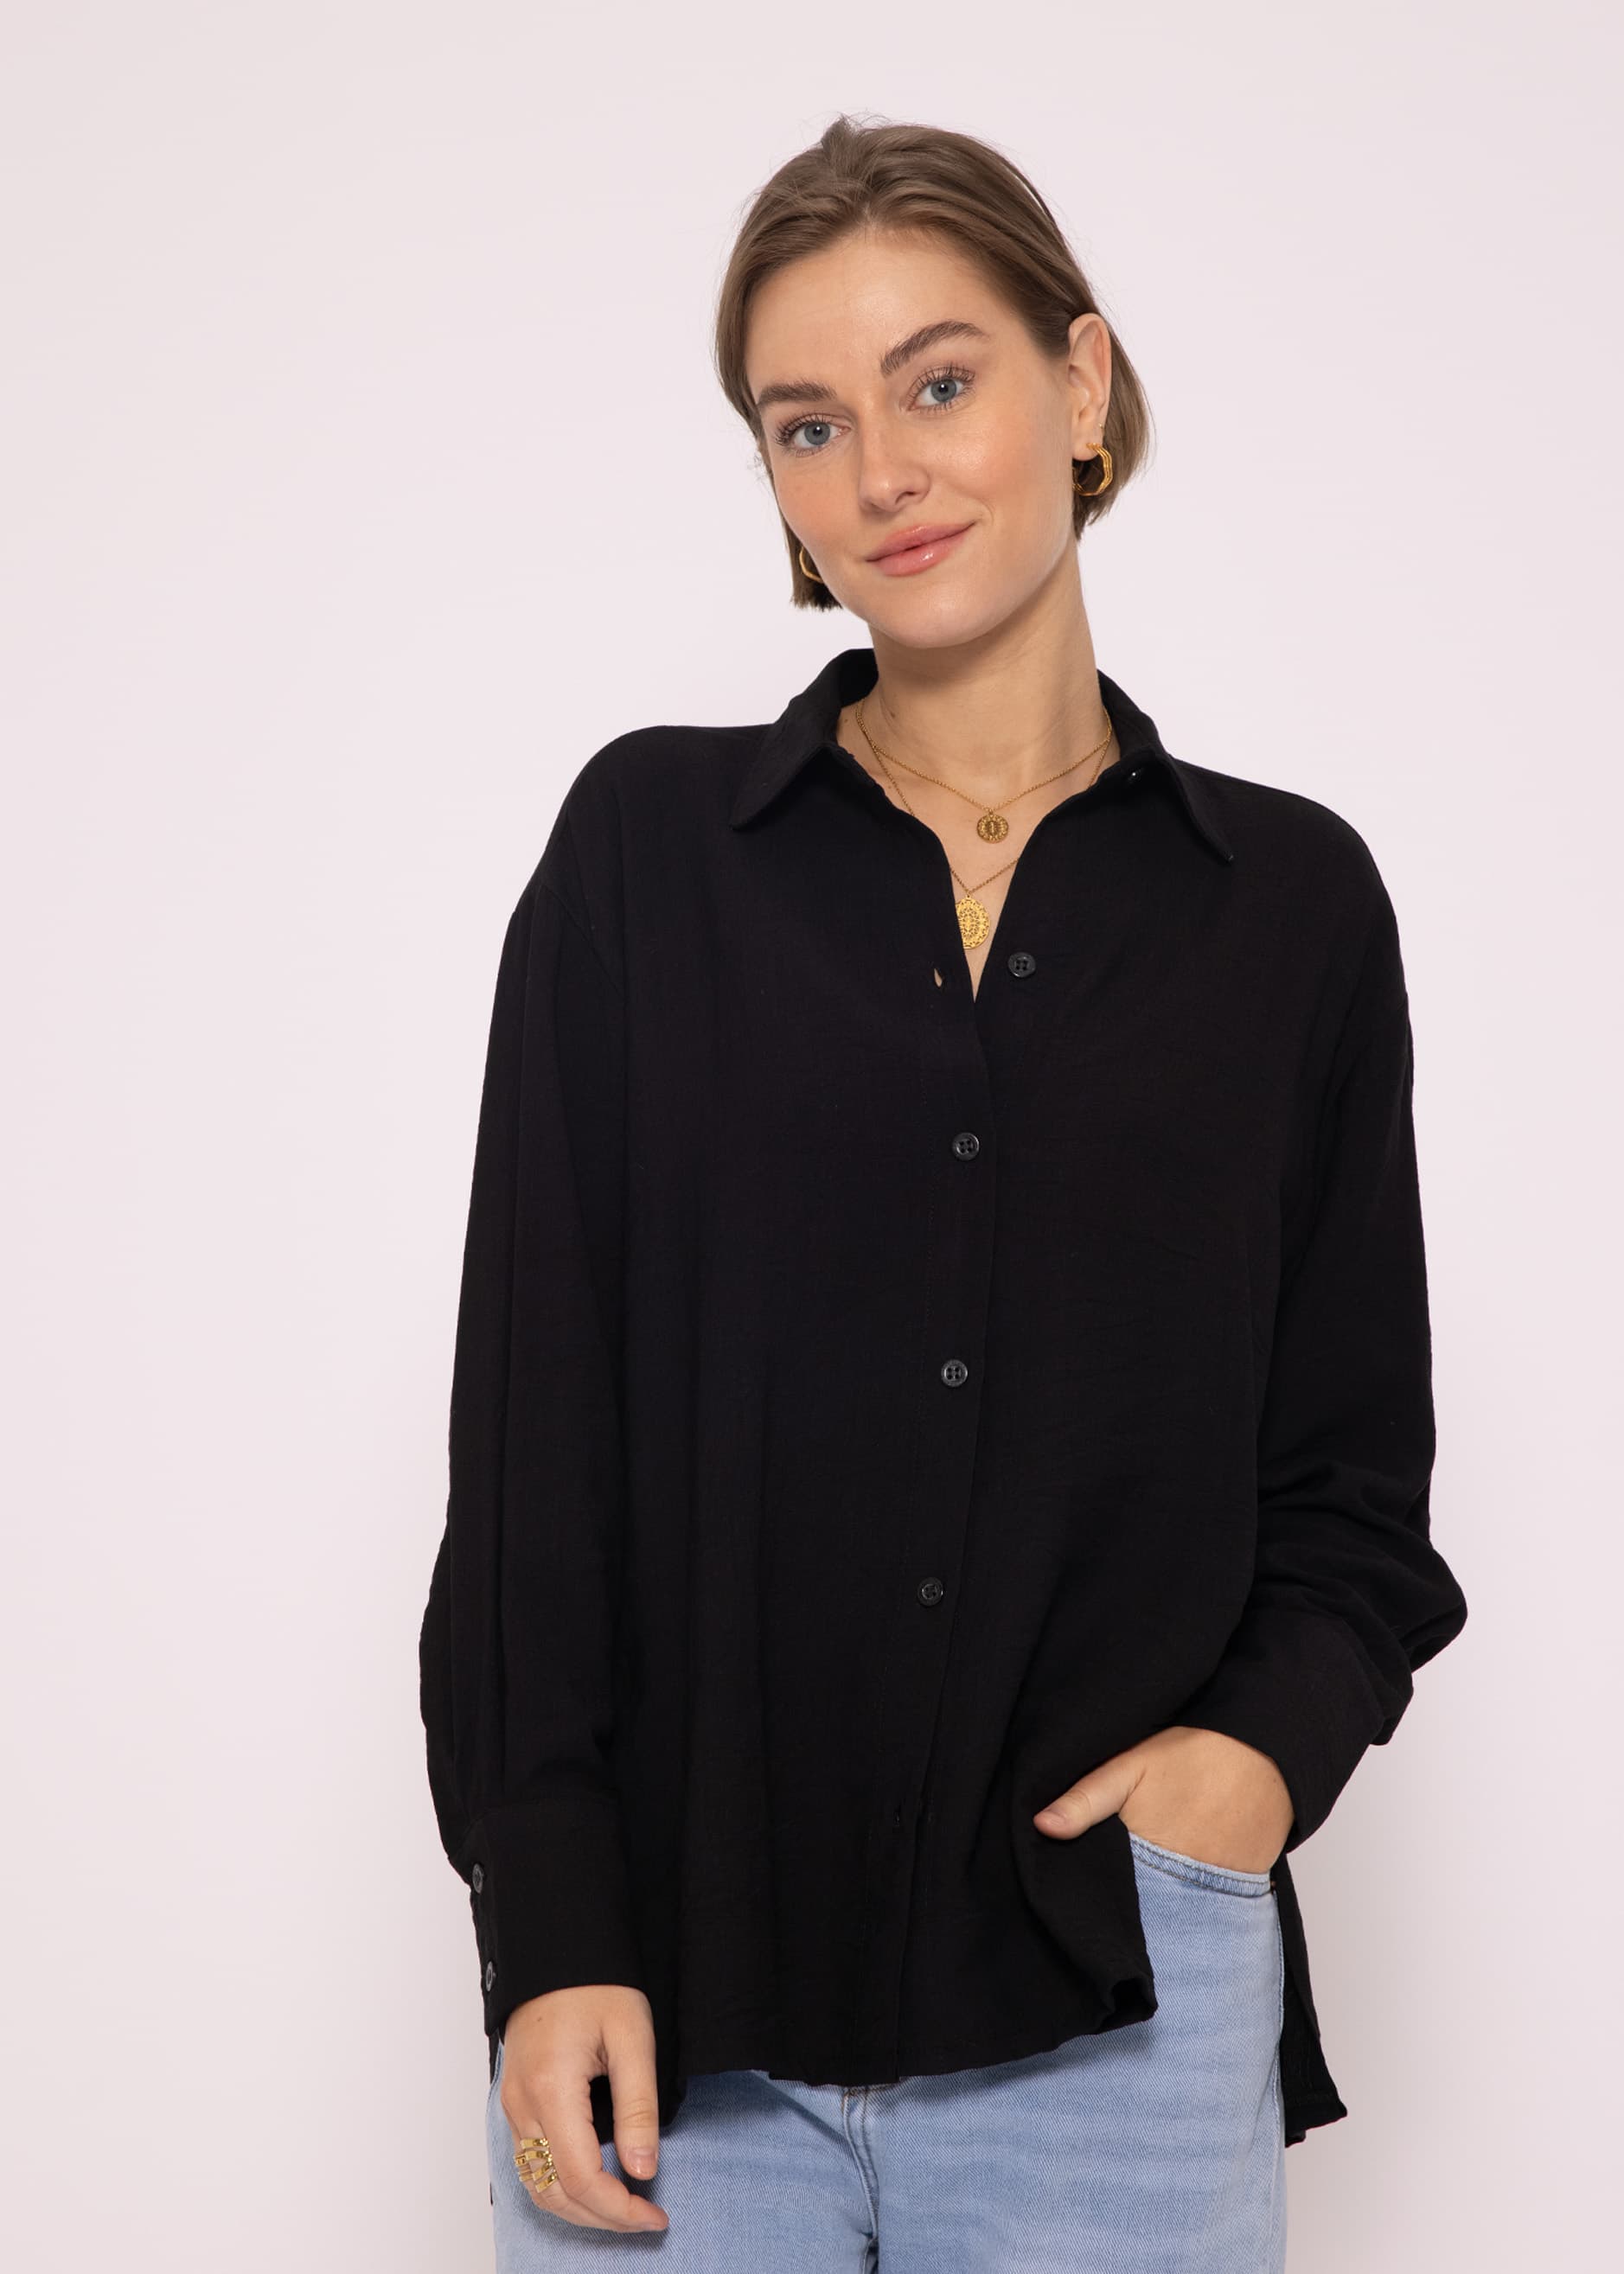 Casual viscose blouse with black | Blouses | SassyClassy.com